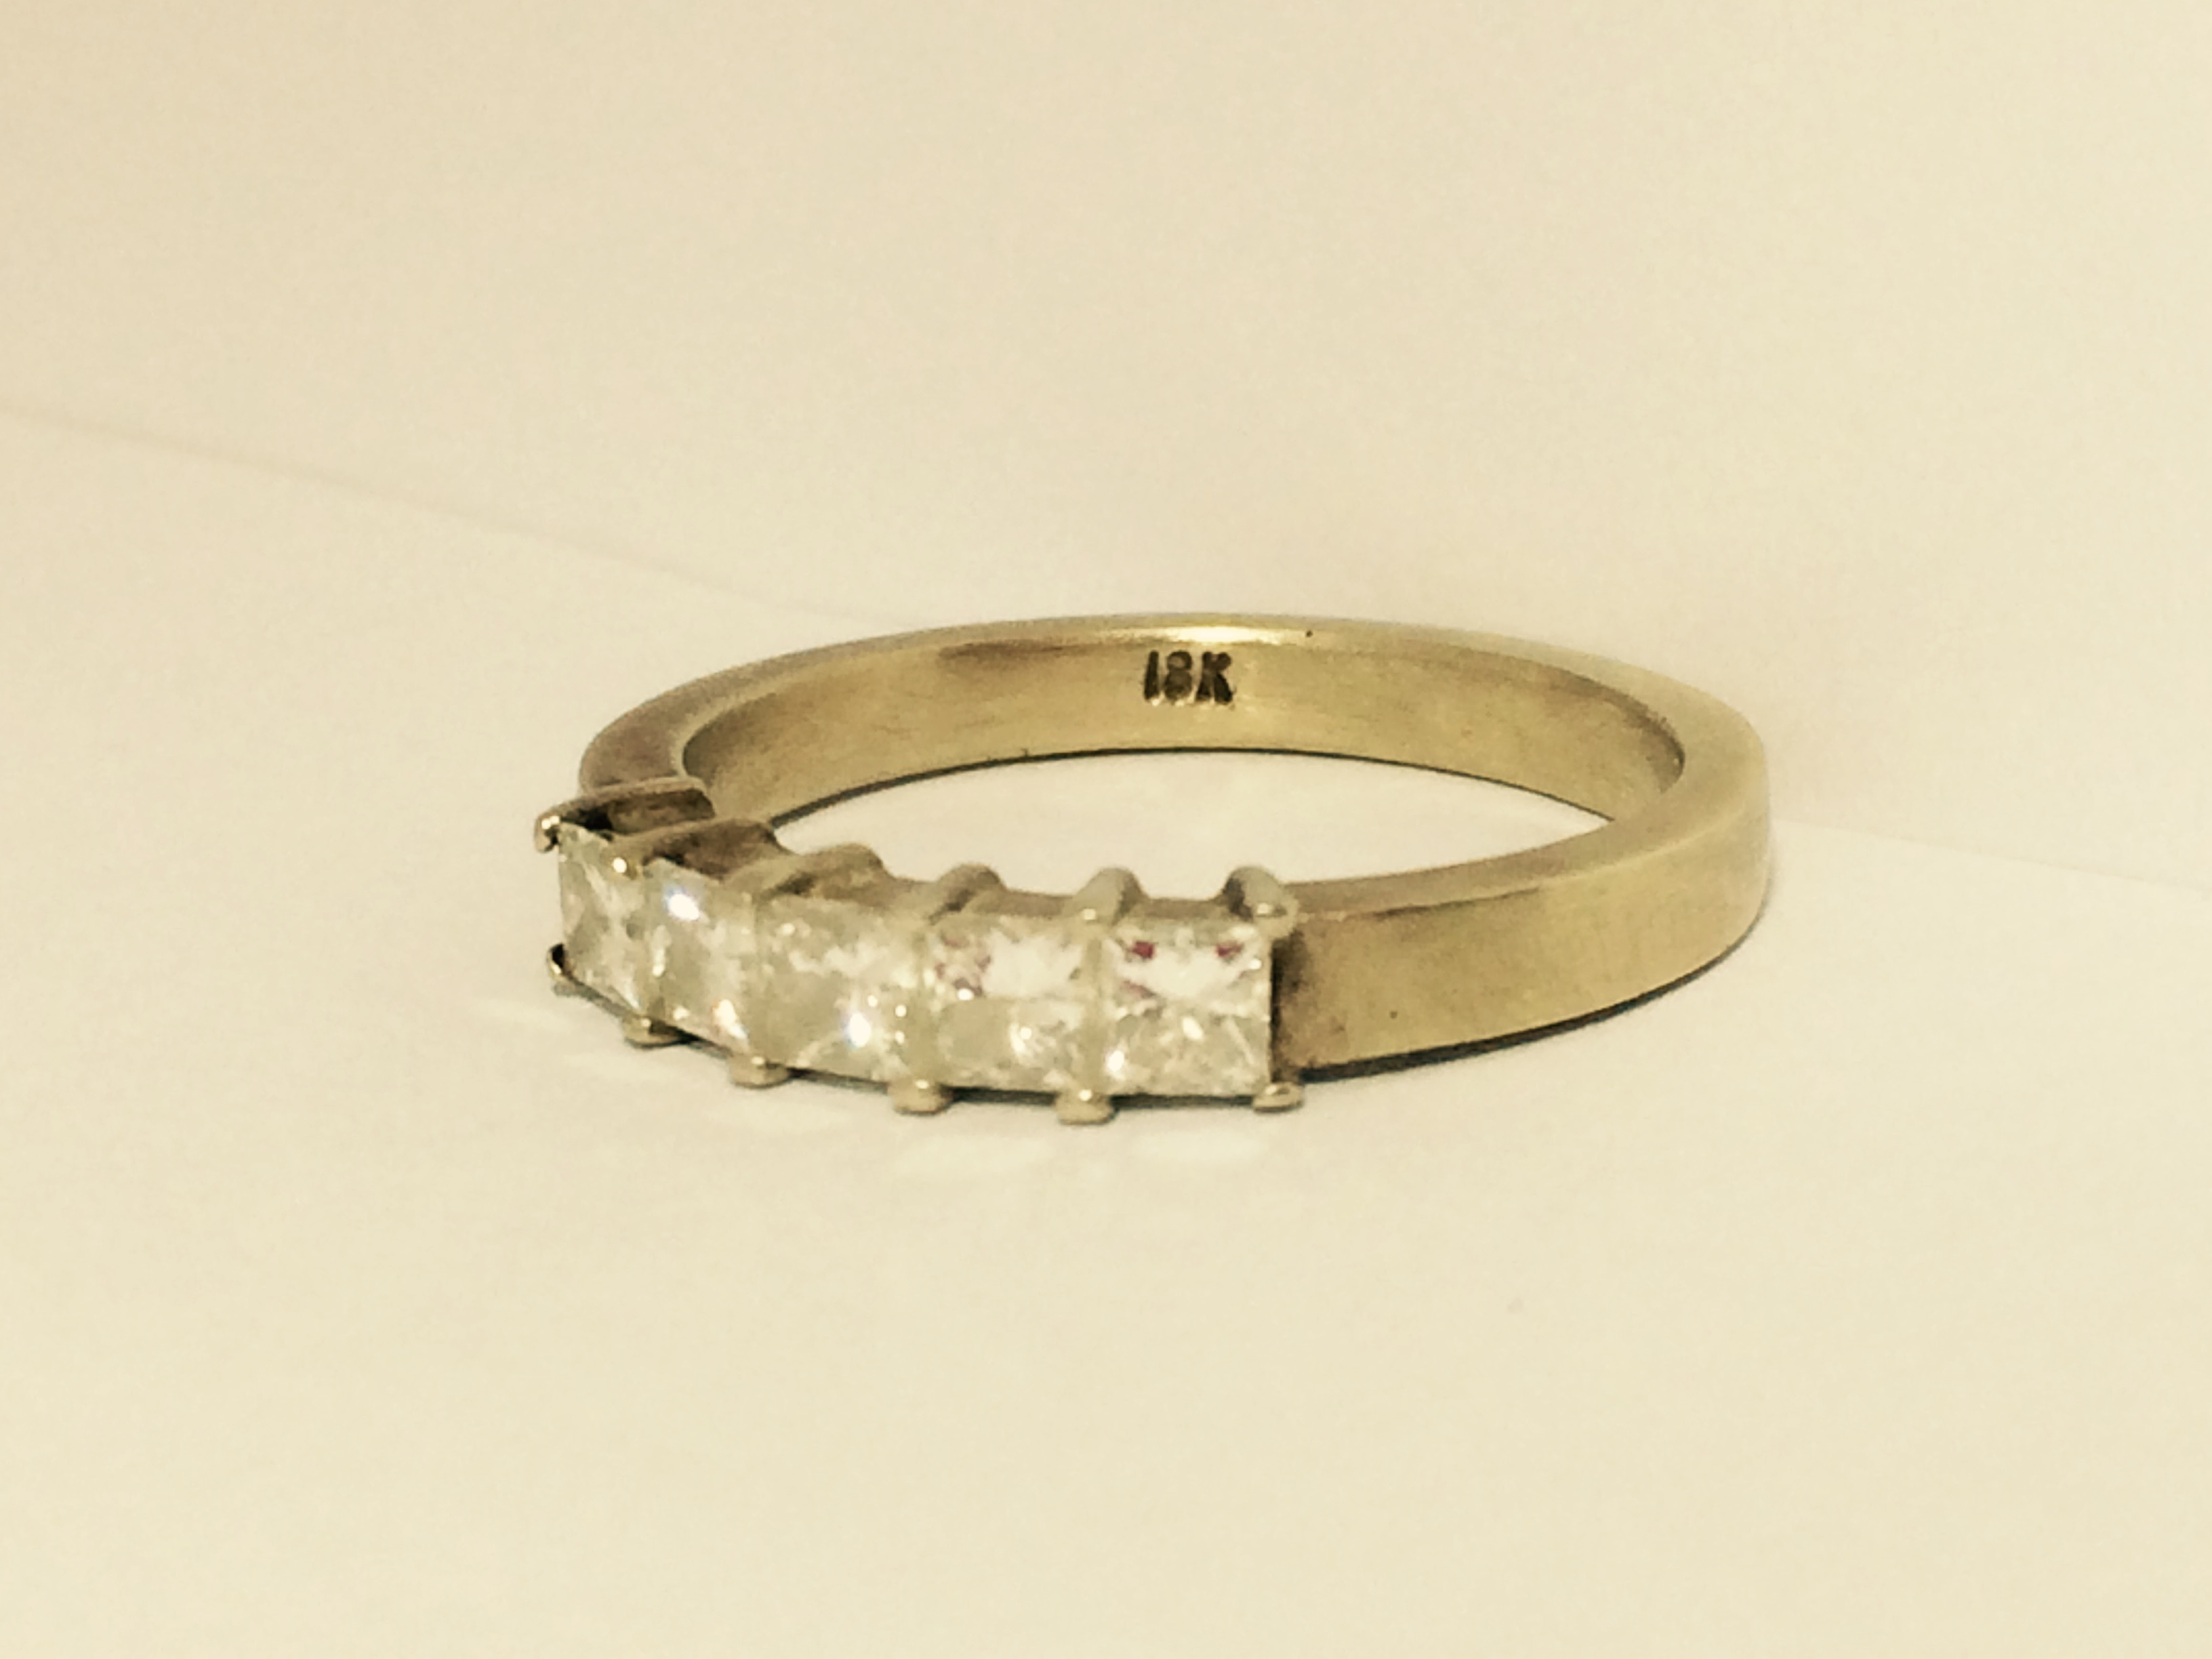 14K Gold Ring with 5 Square Diamonds